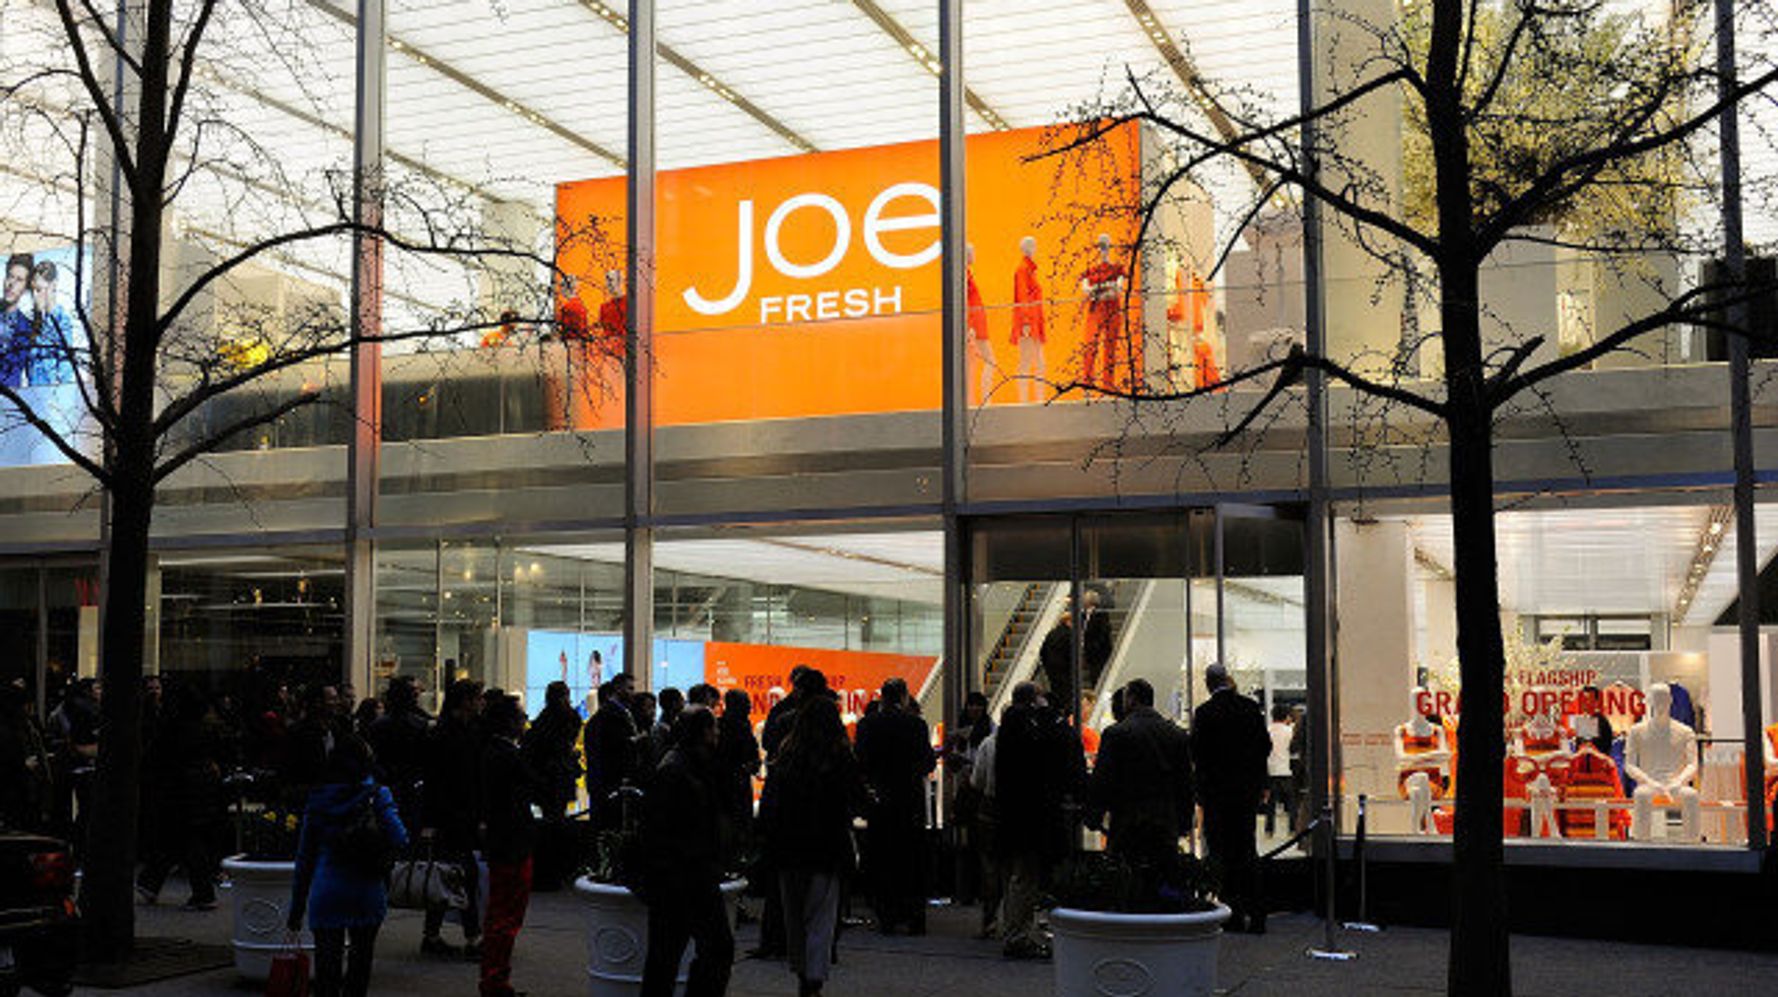 Joe Fresh New Fall Arrivals In Canada You Can Get For Less Than $35 -  Narcity